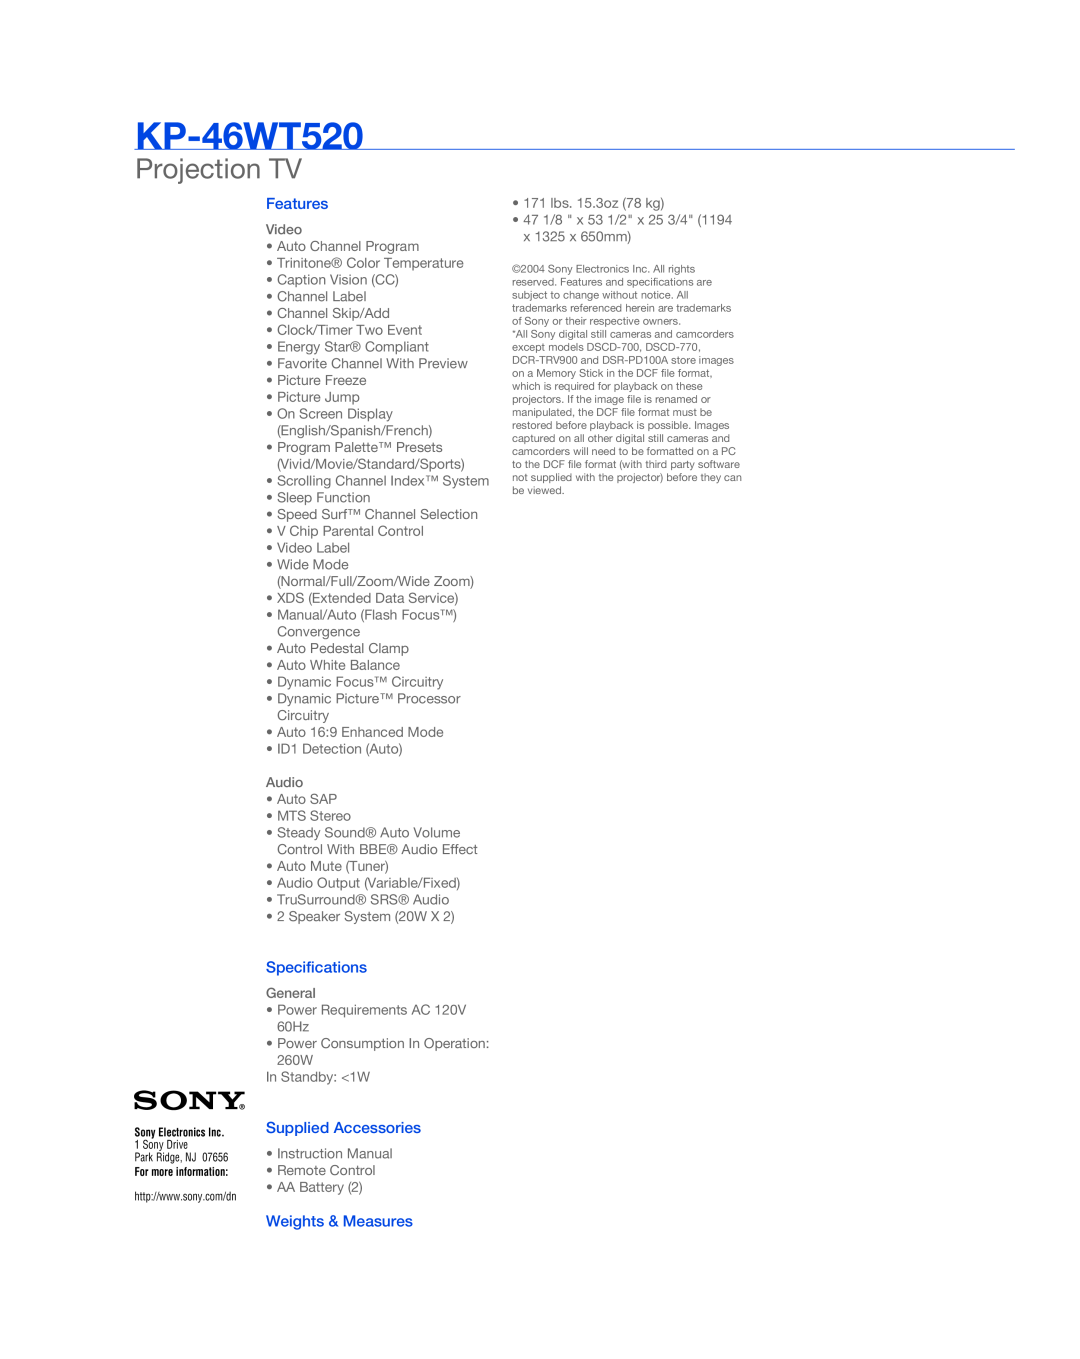 Sony KP-46WT520, 329 manual Projection TV, Features, Specifications, Supplied Accessories, Weights & Measures 